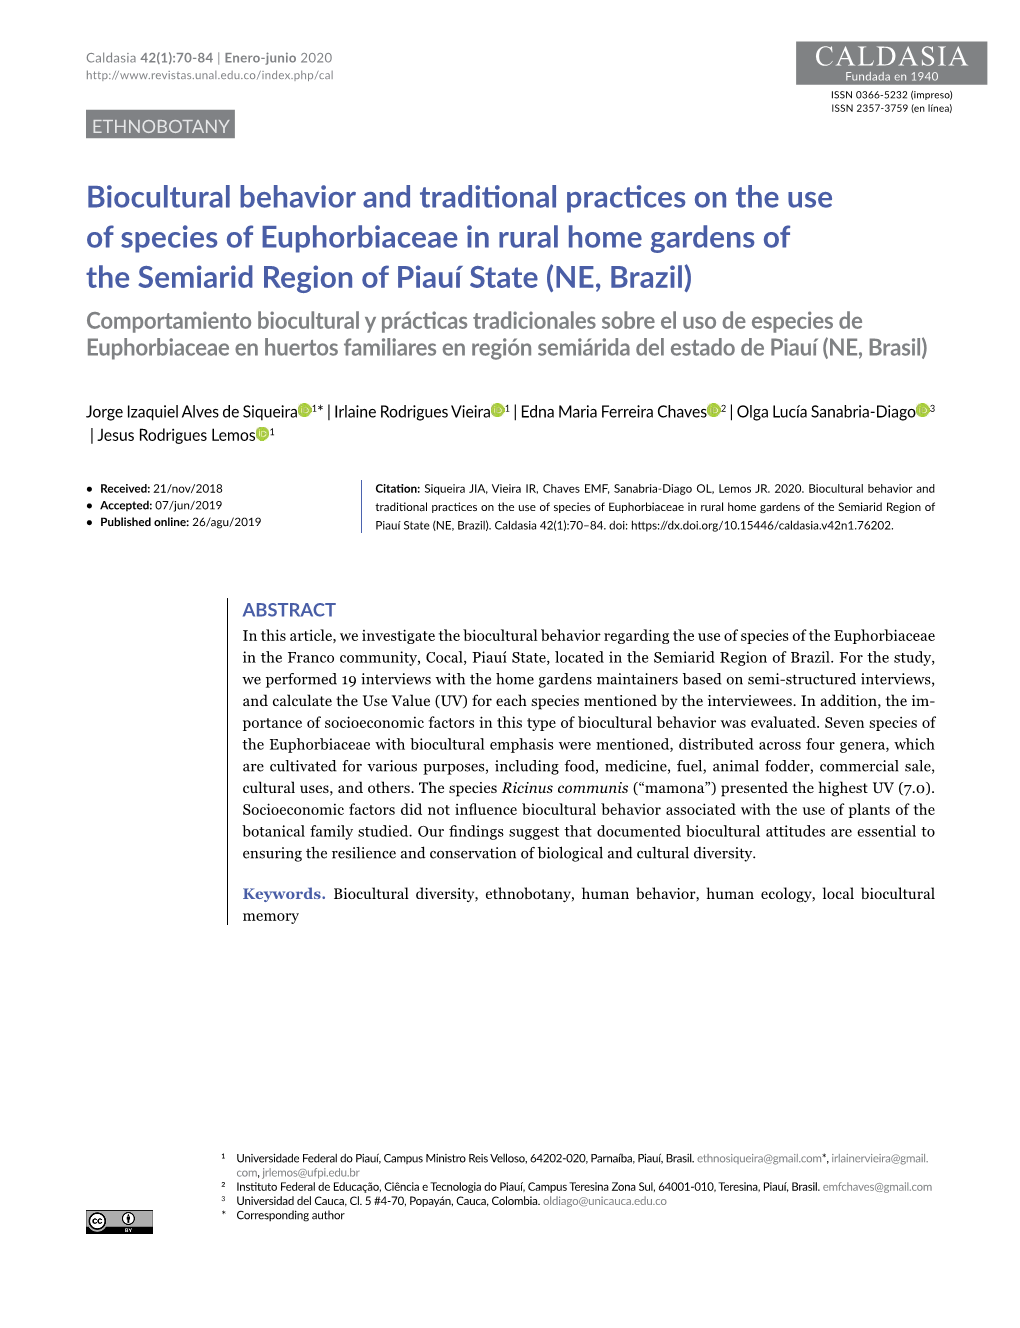 Biocultural Behavior and Traditional Practices on The